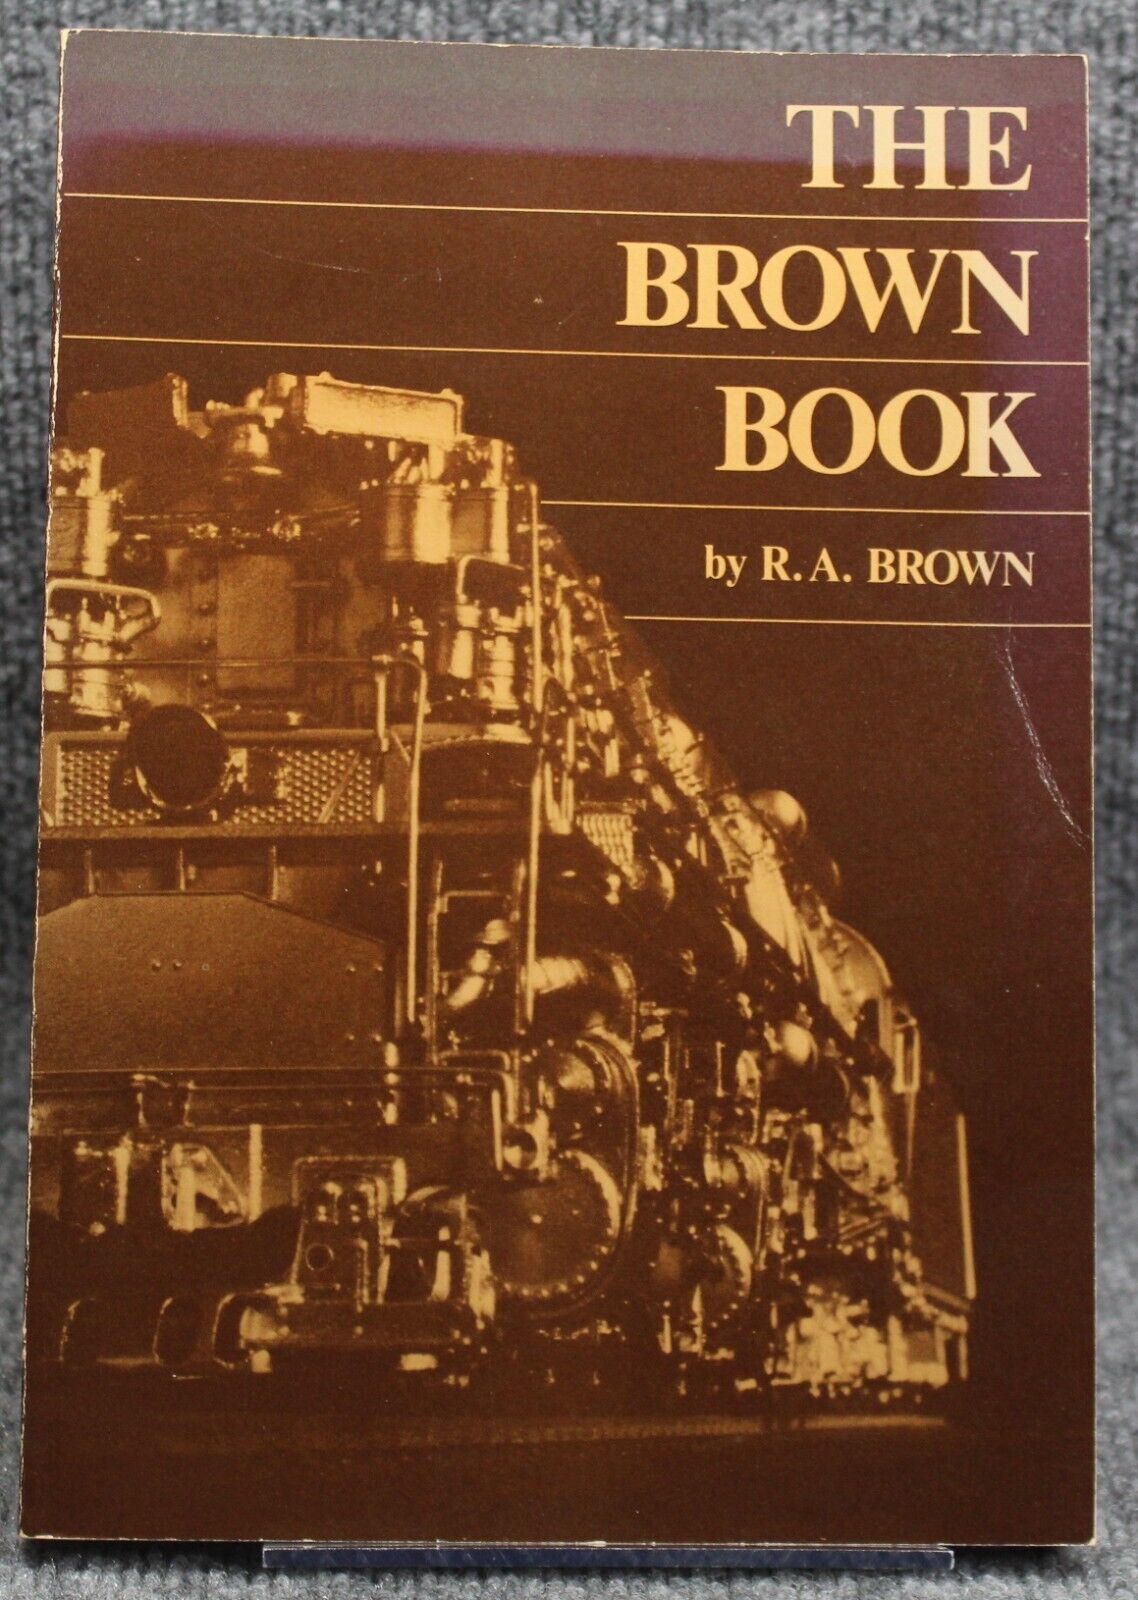 The Brown Book by R.A. Brown Guide To Buying and Selling HO Brass Trains 1982